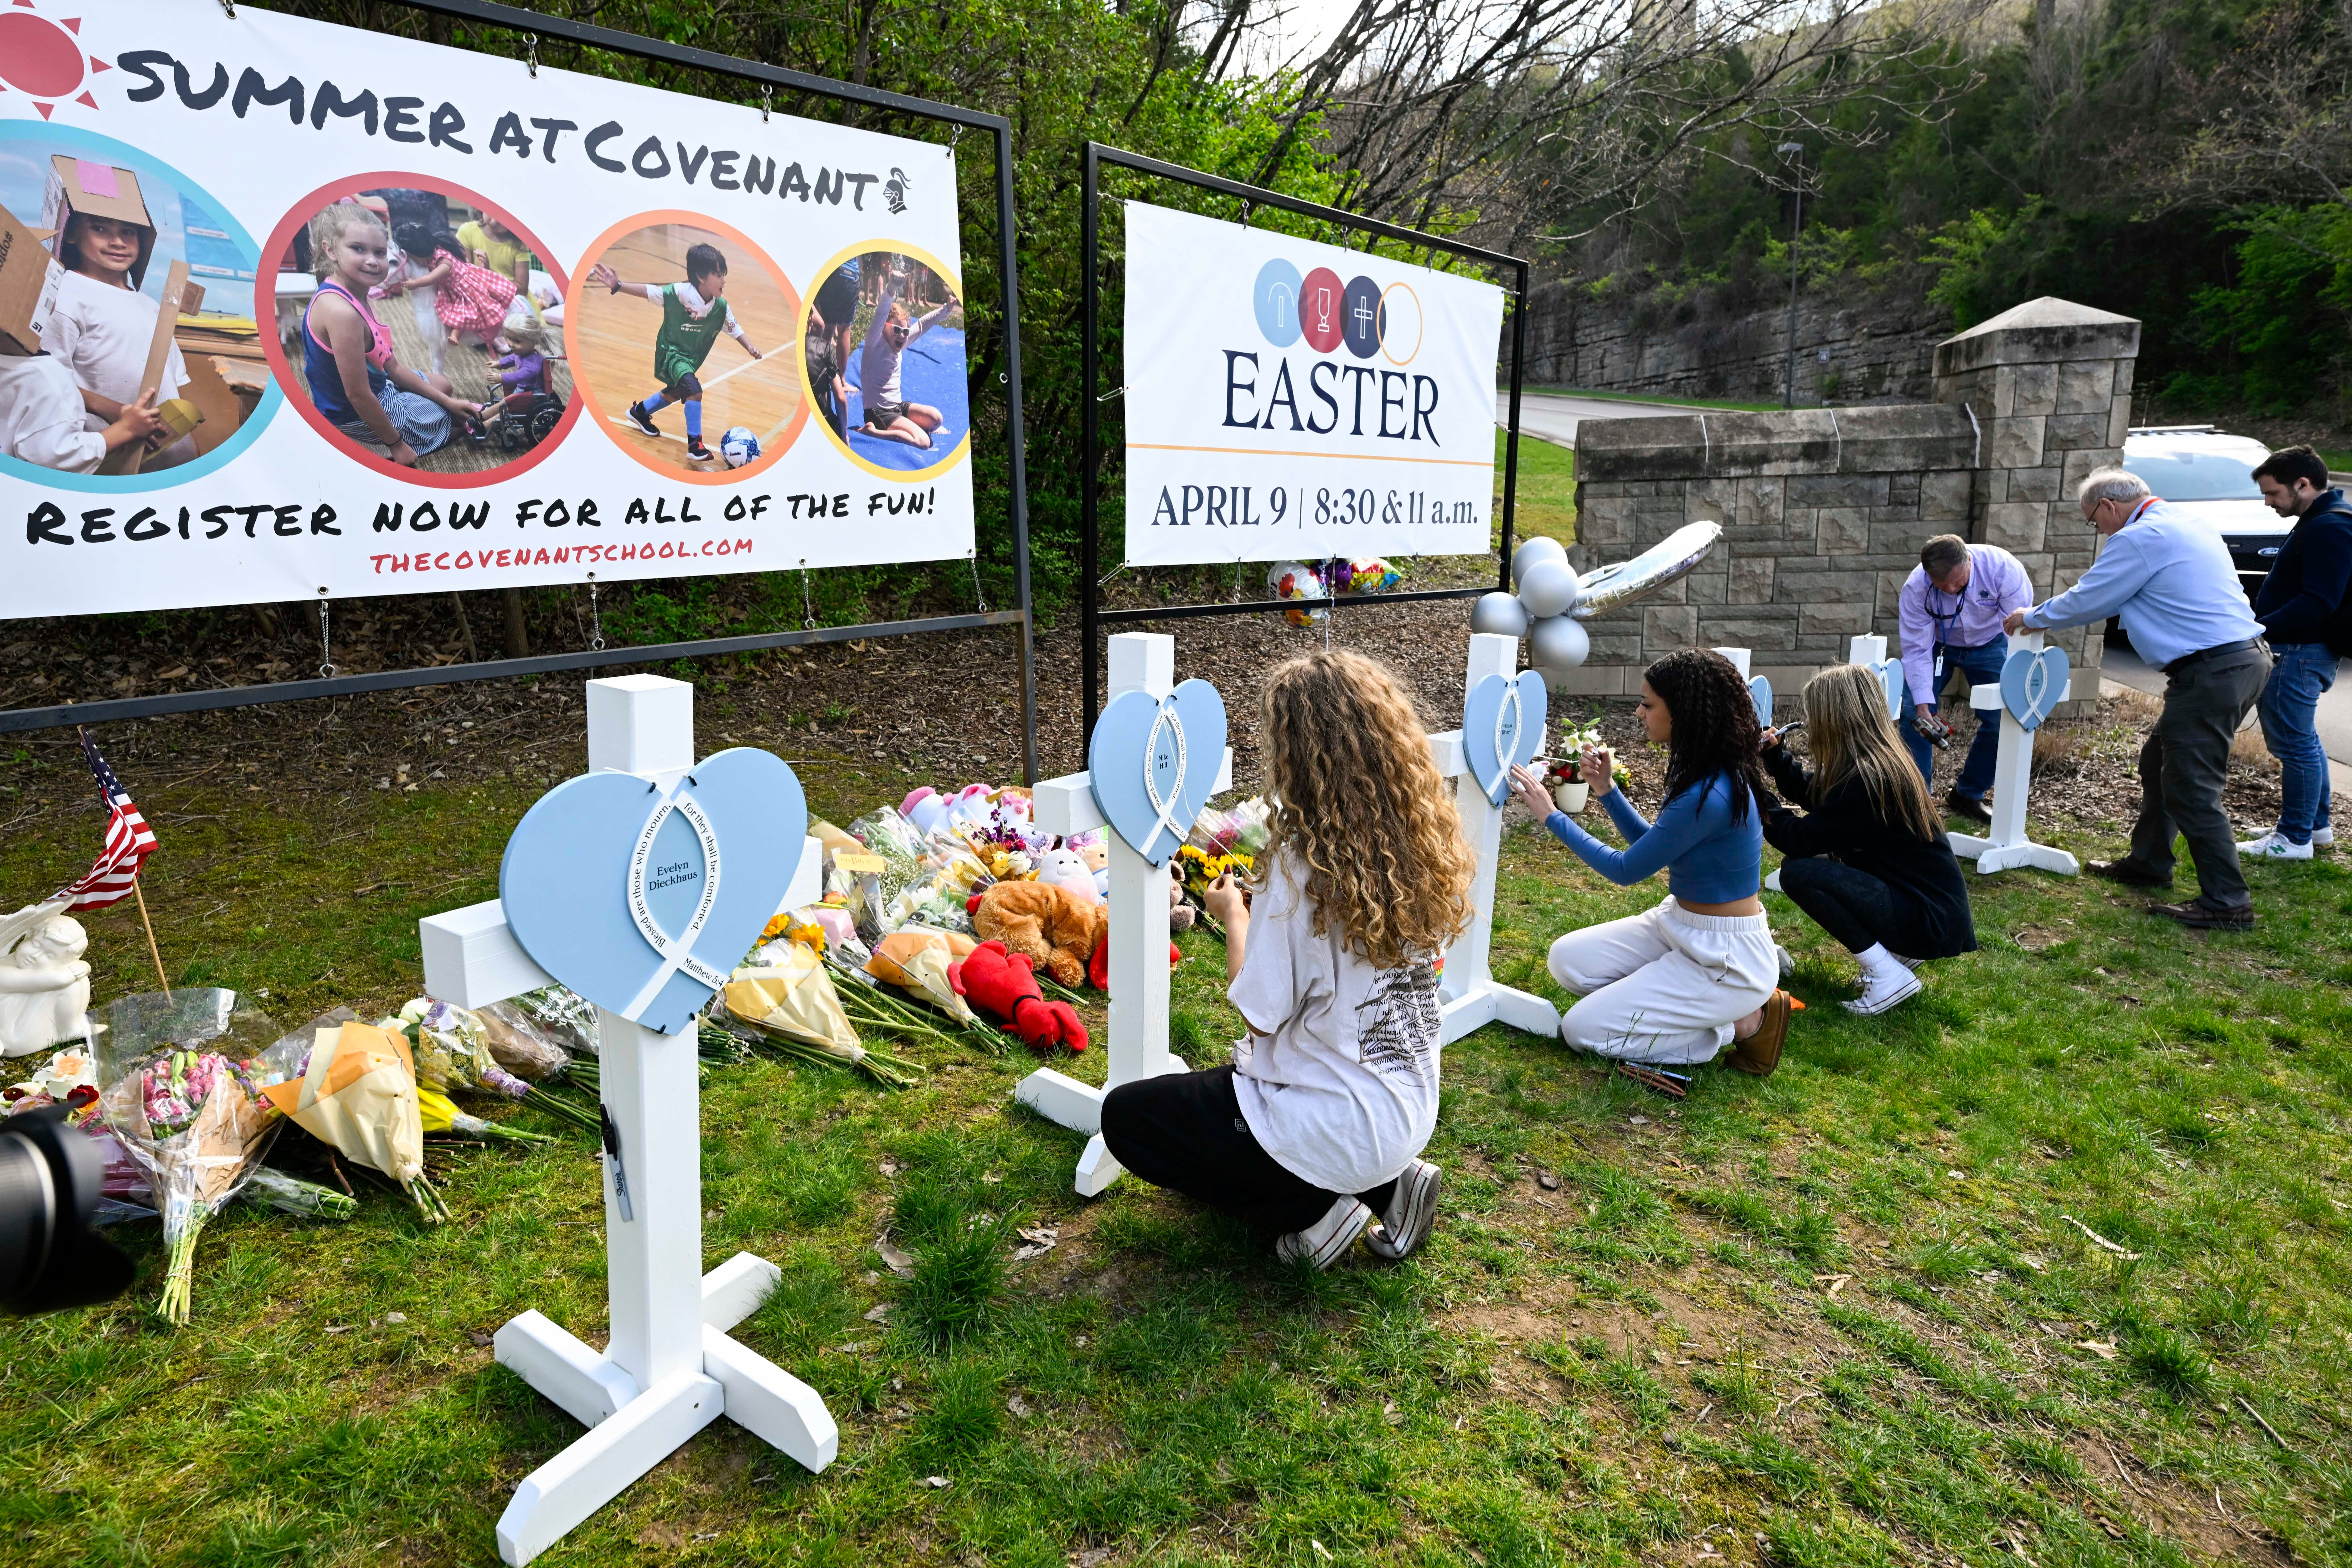 Memorial set up for victims of the school shooting